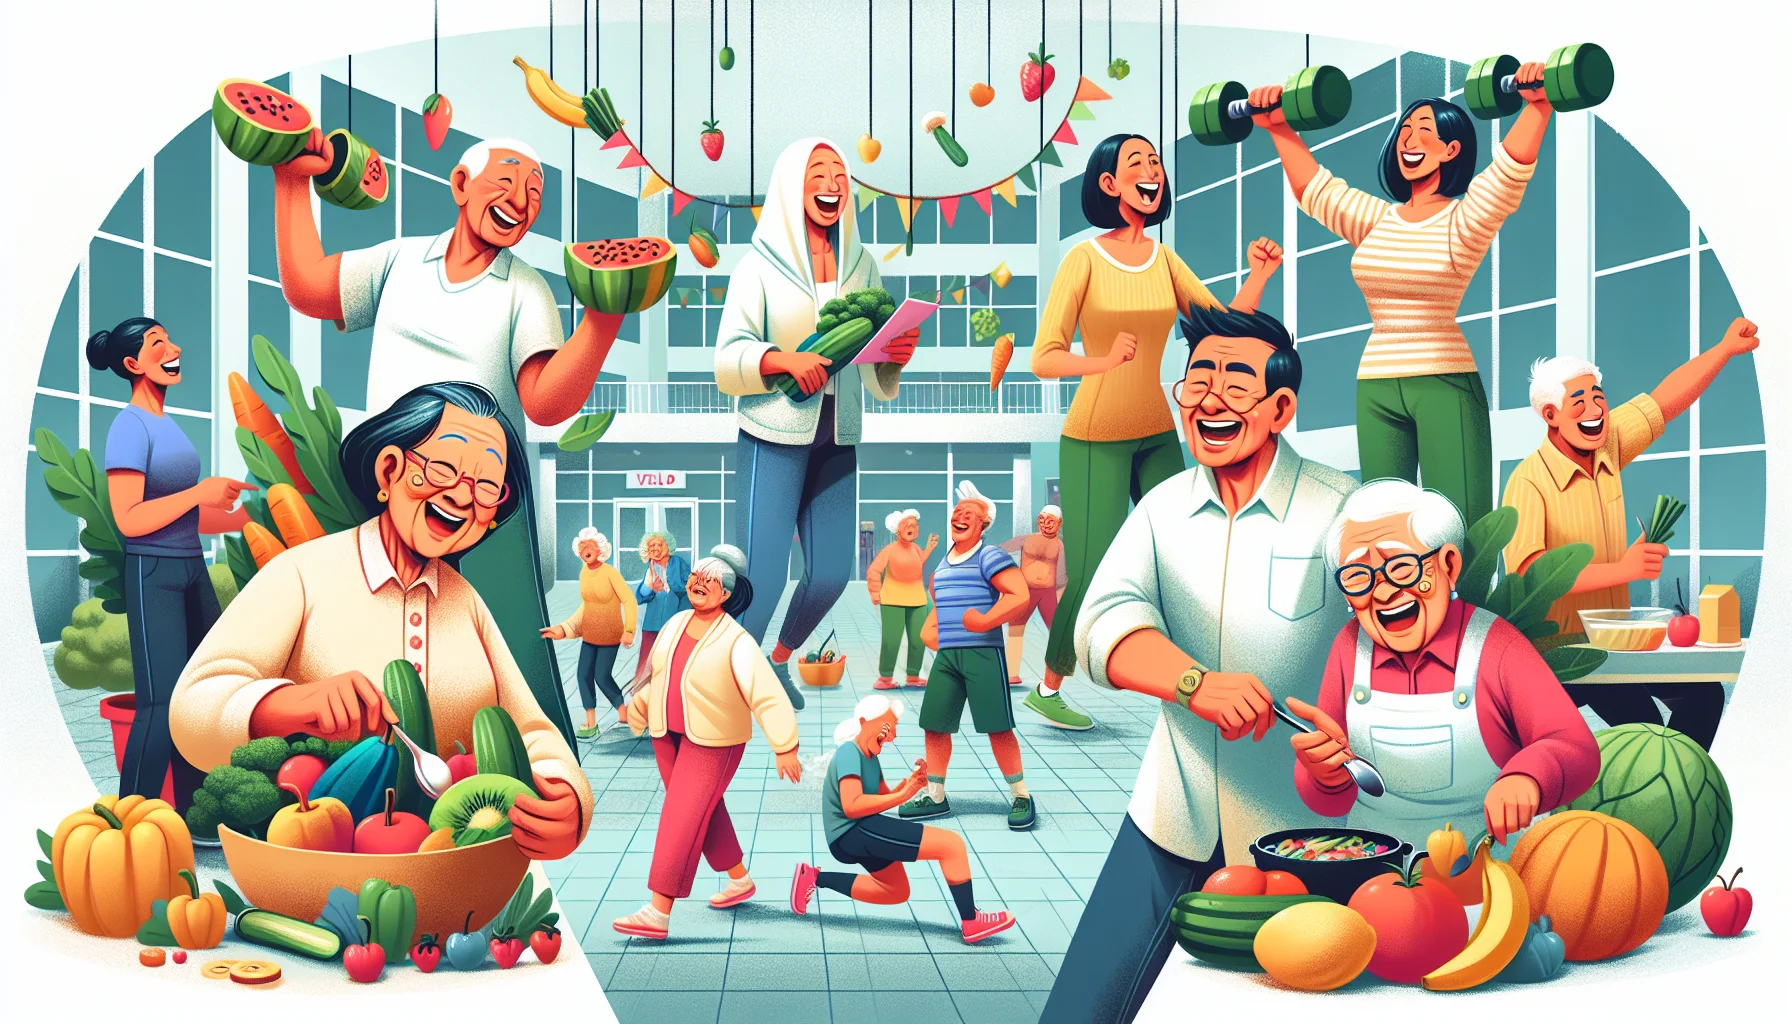 Imagine an amusing scene of elderly people who are dedicated to a nutritious diet for healthier skin. In a bustling community center, an elder Asian woman energetically shares the benefits of vitamins for crepey skin with her peers. In one corner, a couple, a Black man and a Hispanic woman, are chuckling while pretending to lift dumbbells made of large vegetables. Nearby, a lively Middle-Eastern man is cooking up a storm using colourful fruits and veggies, while a South Asian woman is comically following a recipe from a suspension bridge of eyeglasses. The image conveys the humor, vitality, and dedication of these older folks towards better skin health.